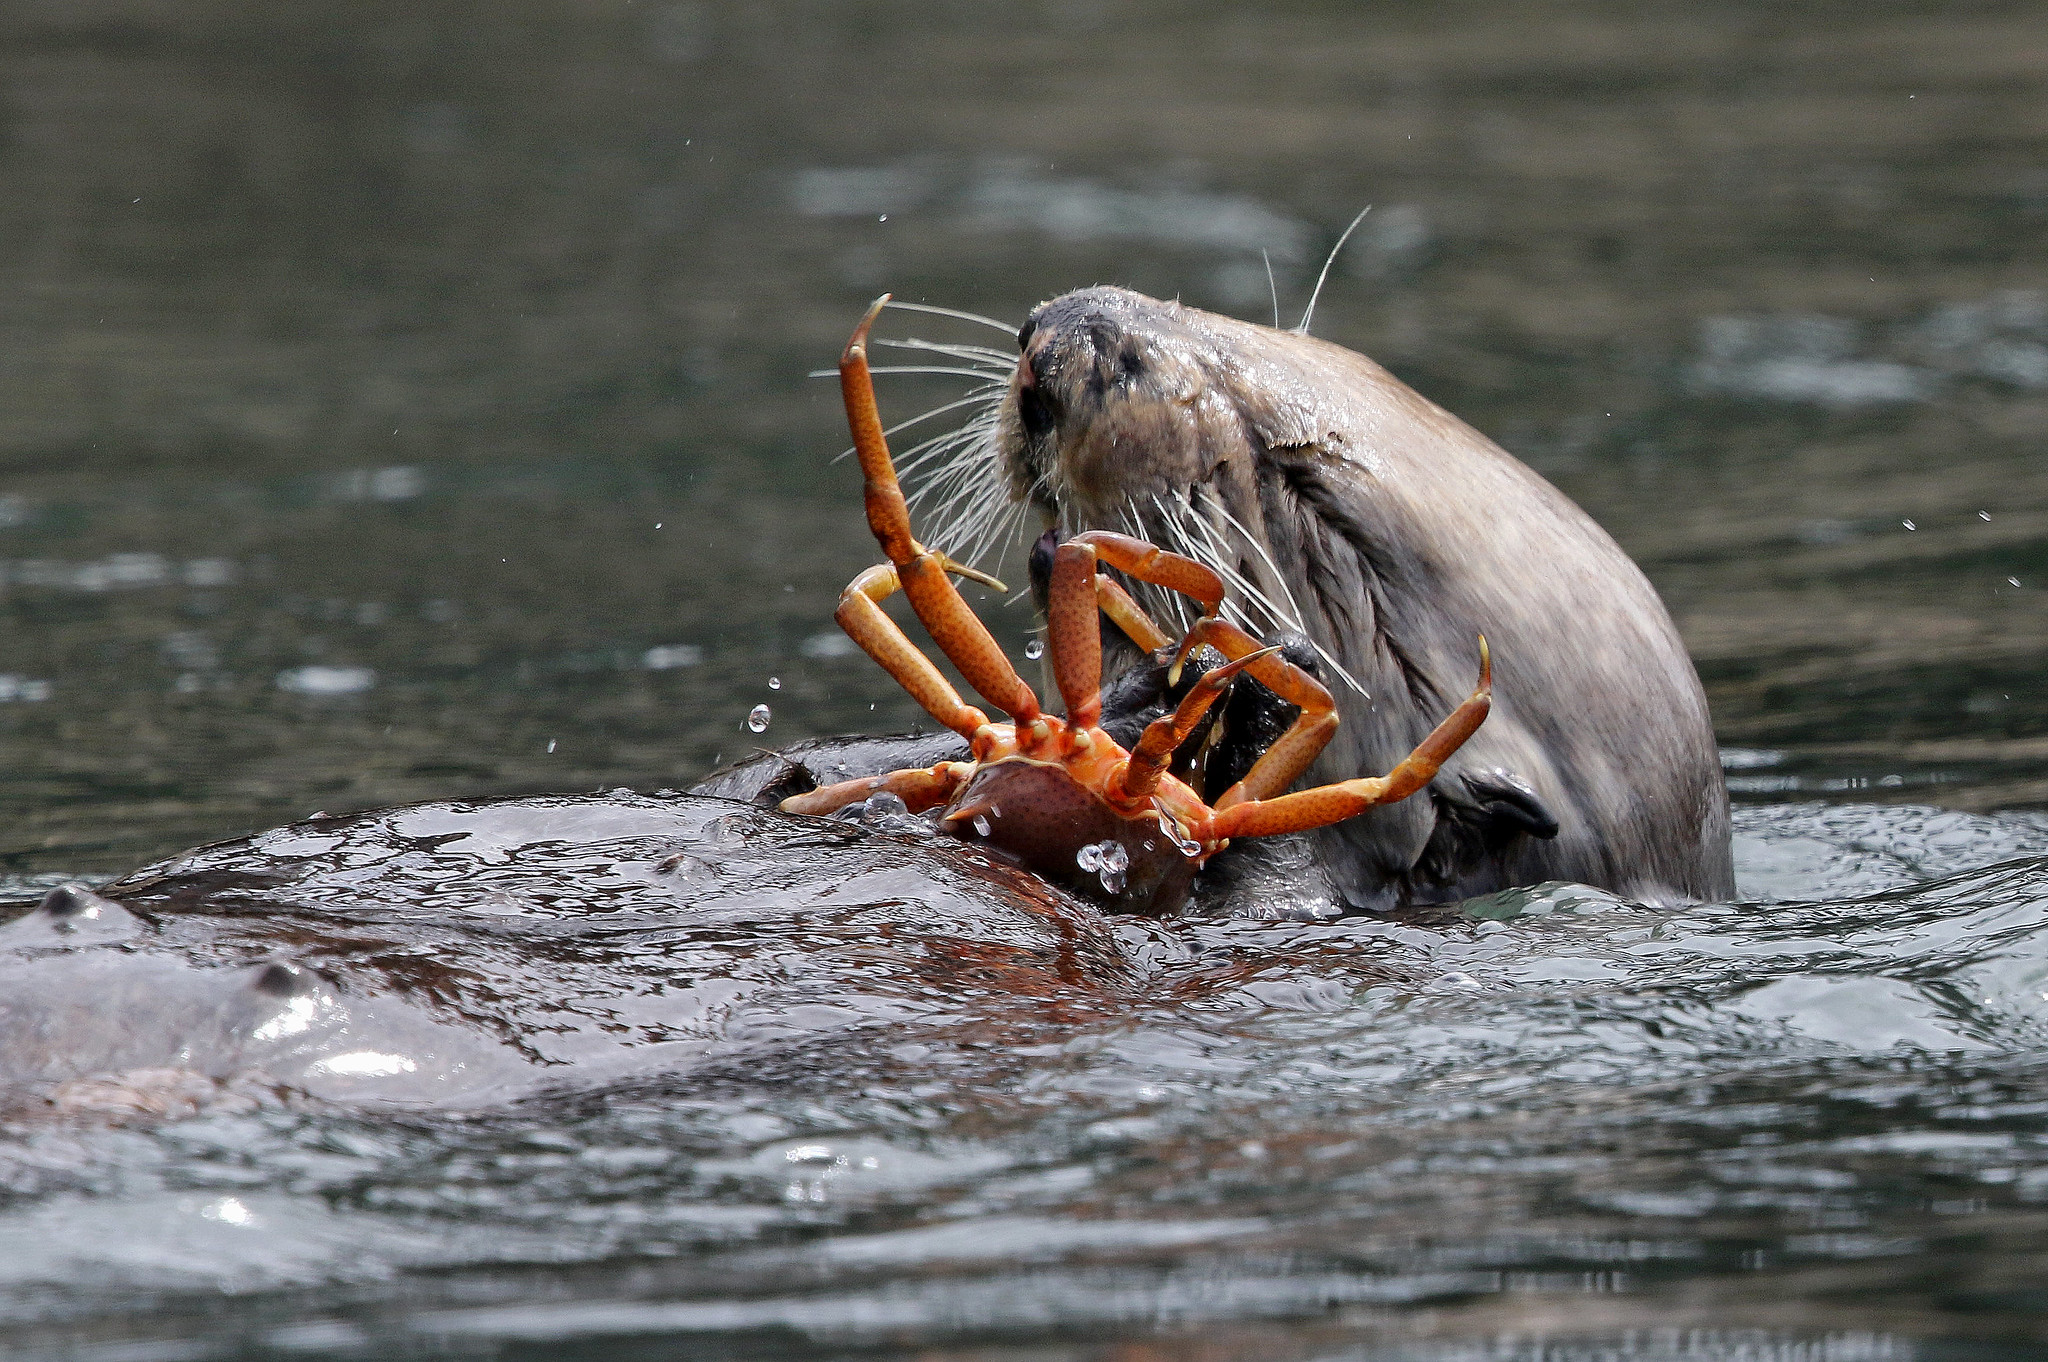 A sea otter floating on its back bites into a crab.